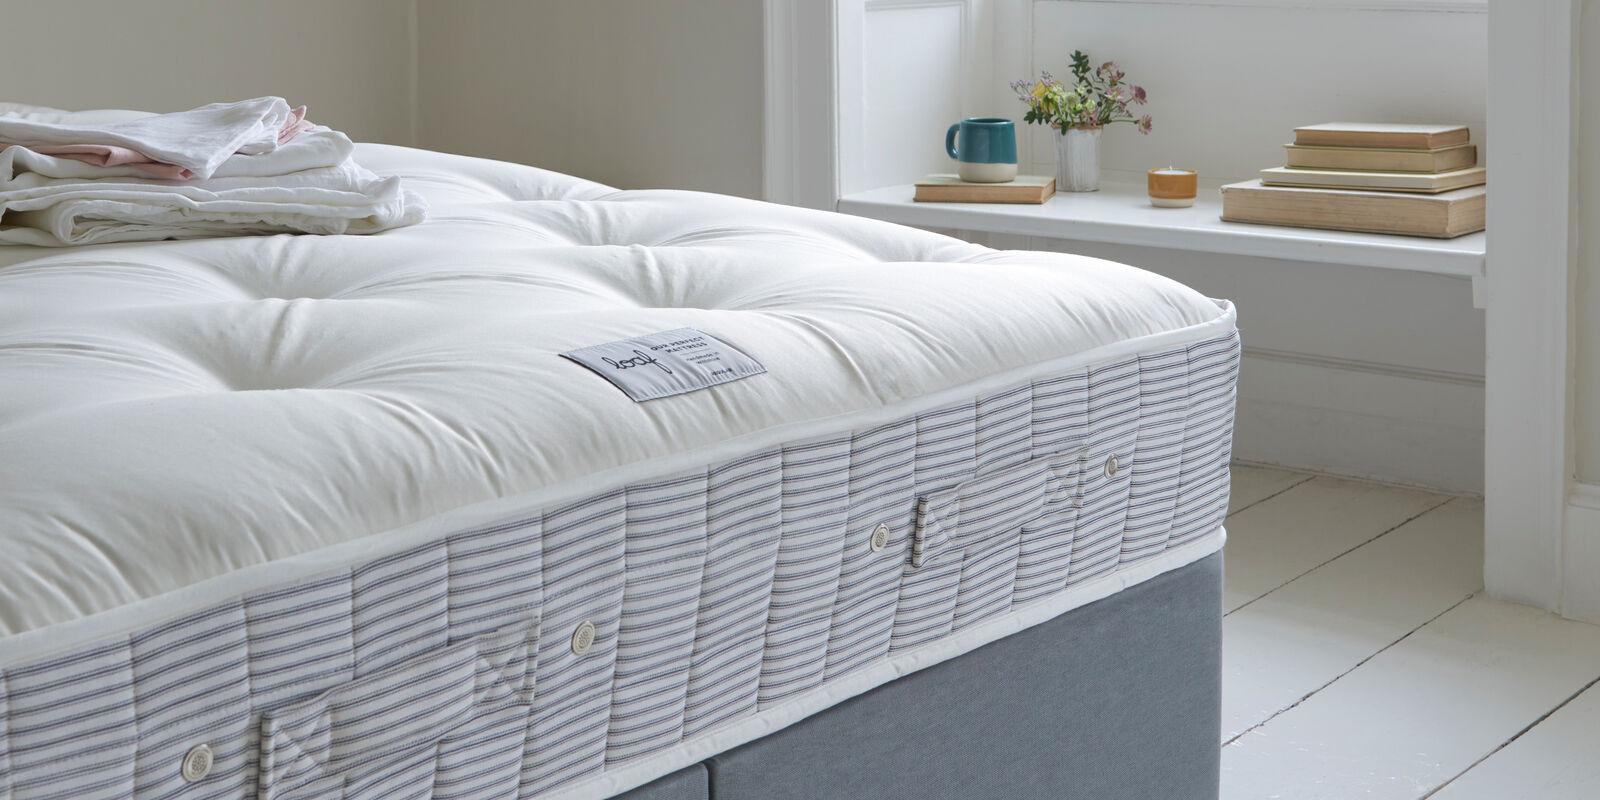 Choosing the Perfect Mattress for a Restful Night’s Sleep